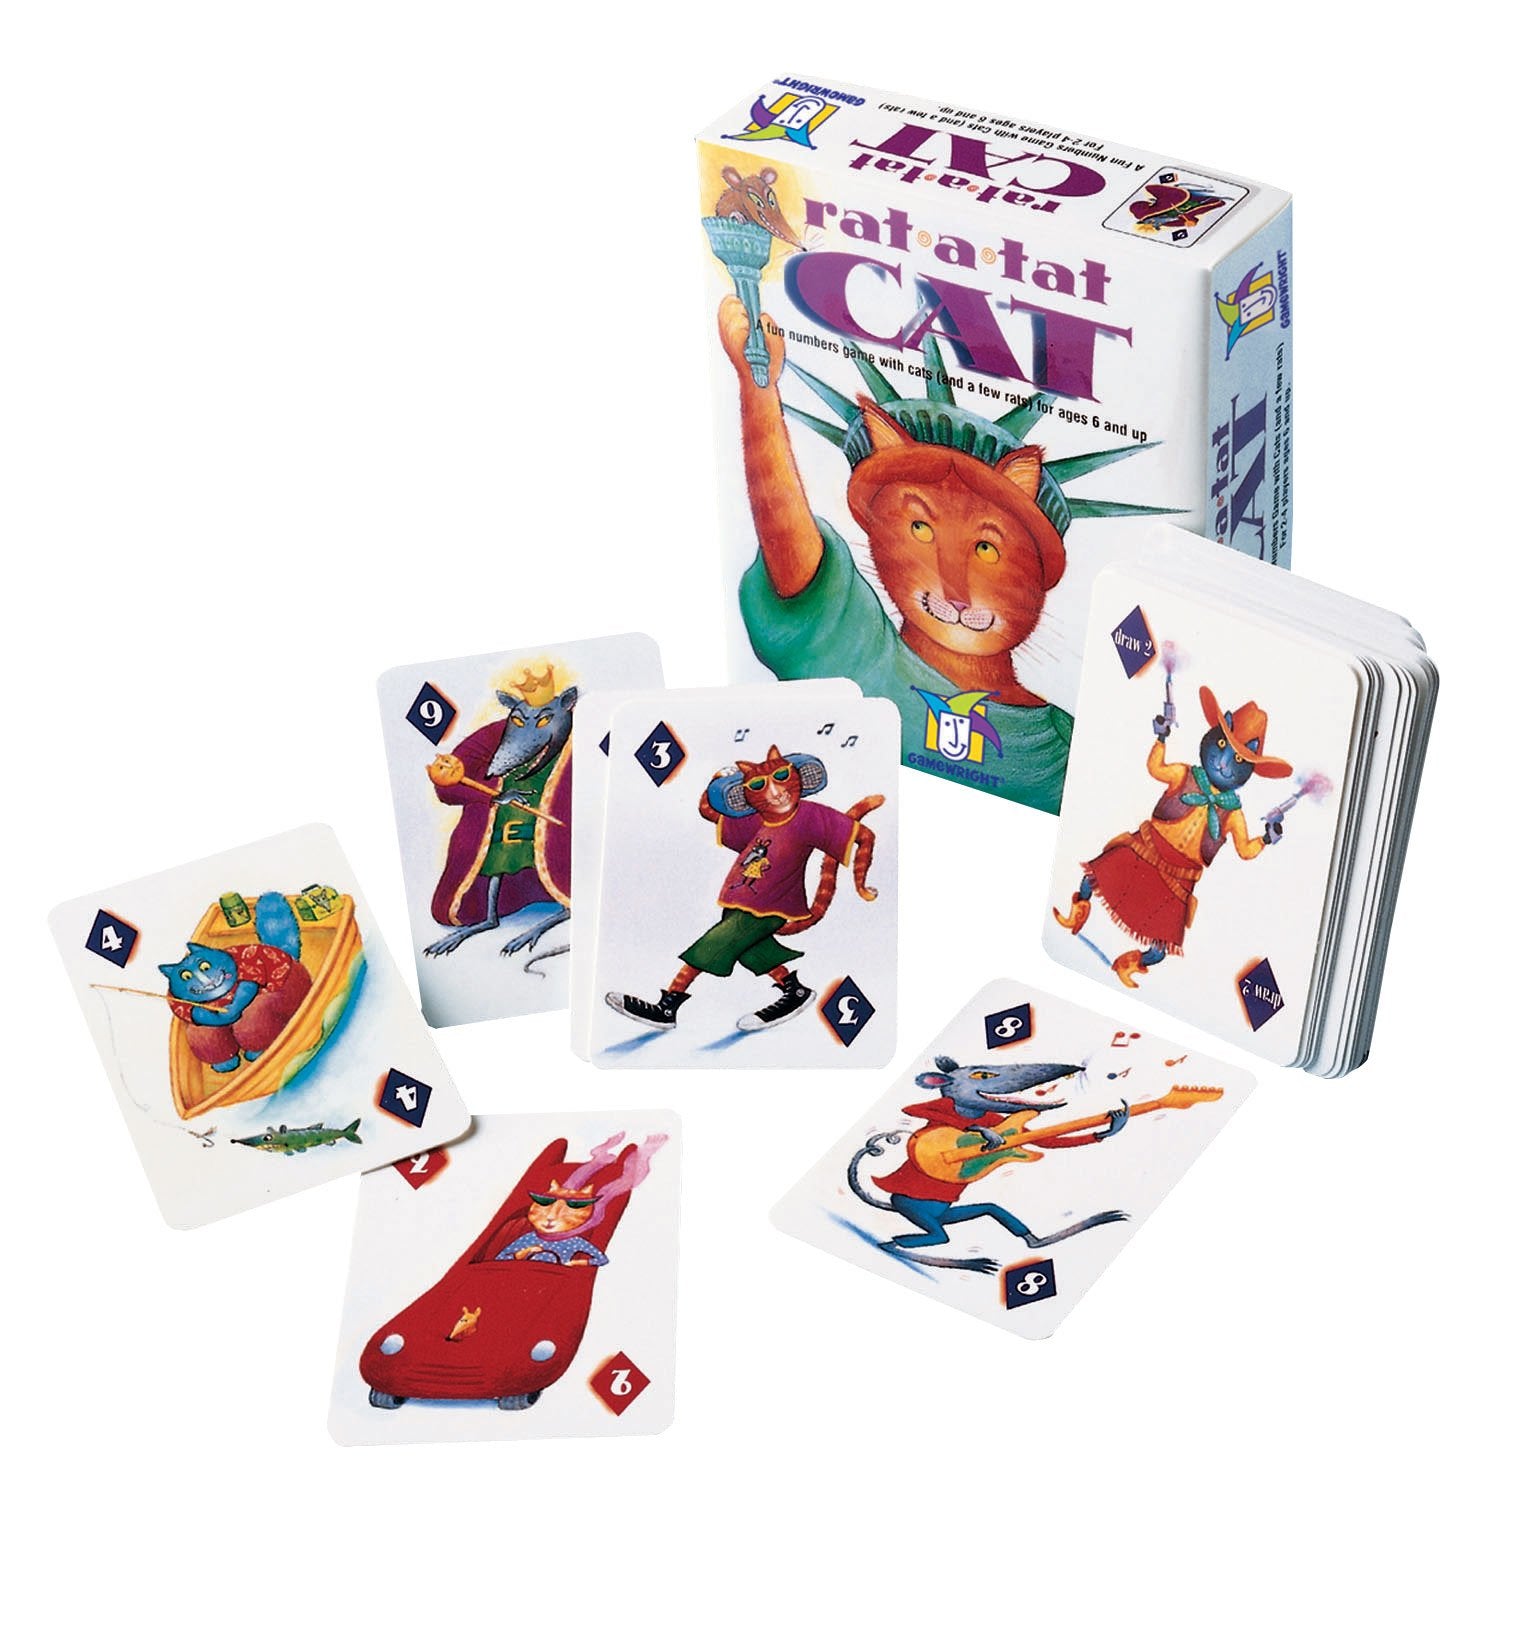 White box depicting an anthropomorphic orange cat dressed as the Statue of Liberty. Displayed on the box is the text "Rat-a-tat Cat". Also displayed are several numbered cards of anthropomorphic cats in different costumes.